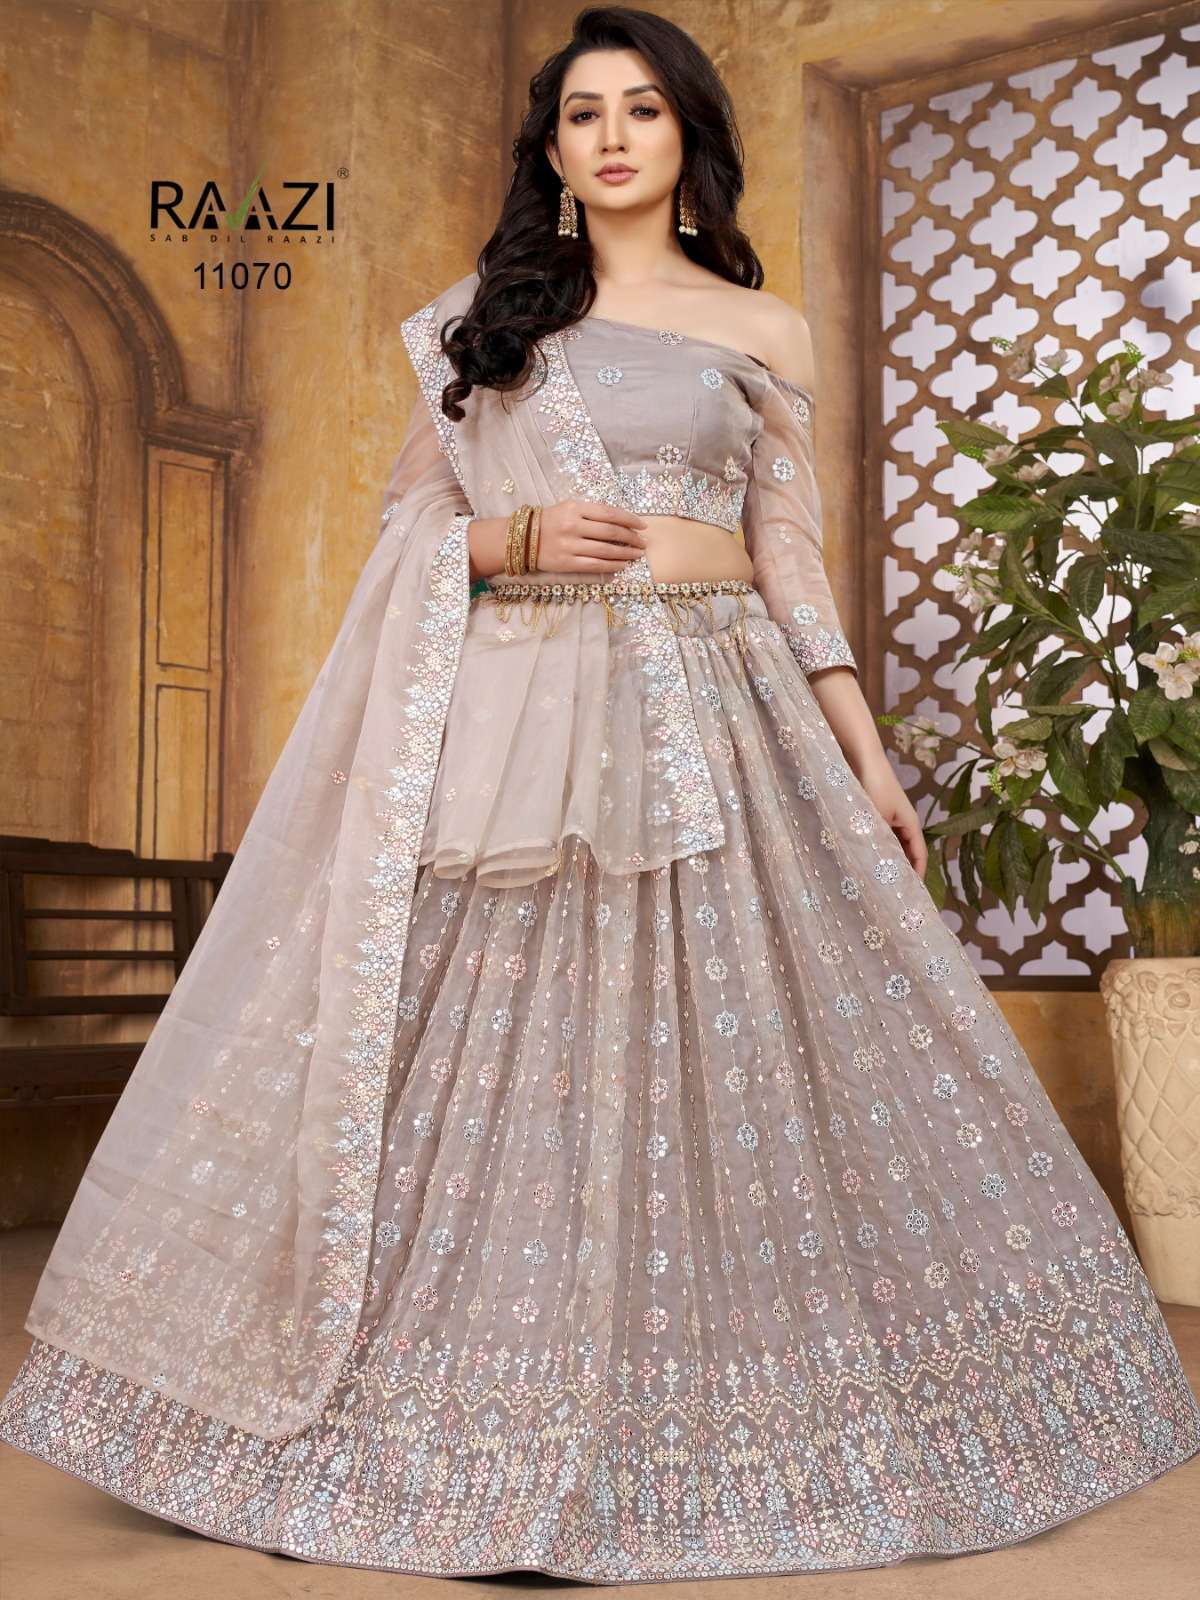 Bridal Lehenga in Pastel Shades is the New Fashion | Indian Fashion Mantra-tuongthan.vn